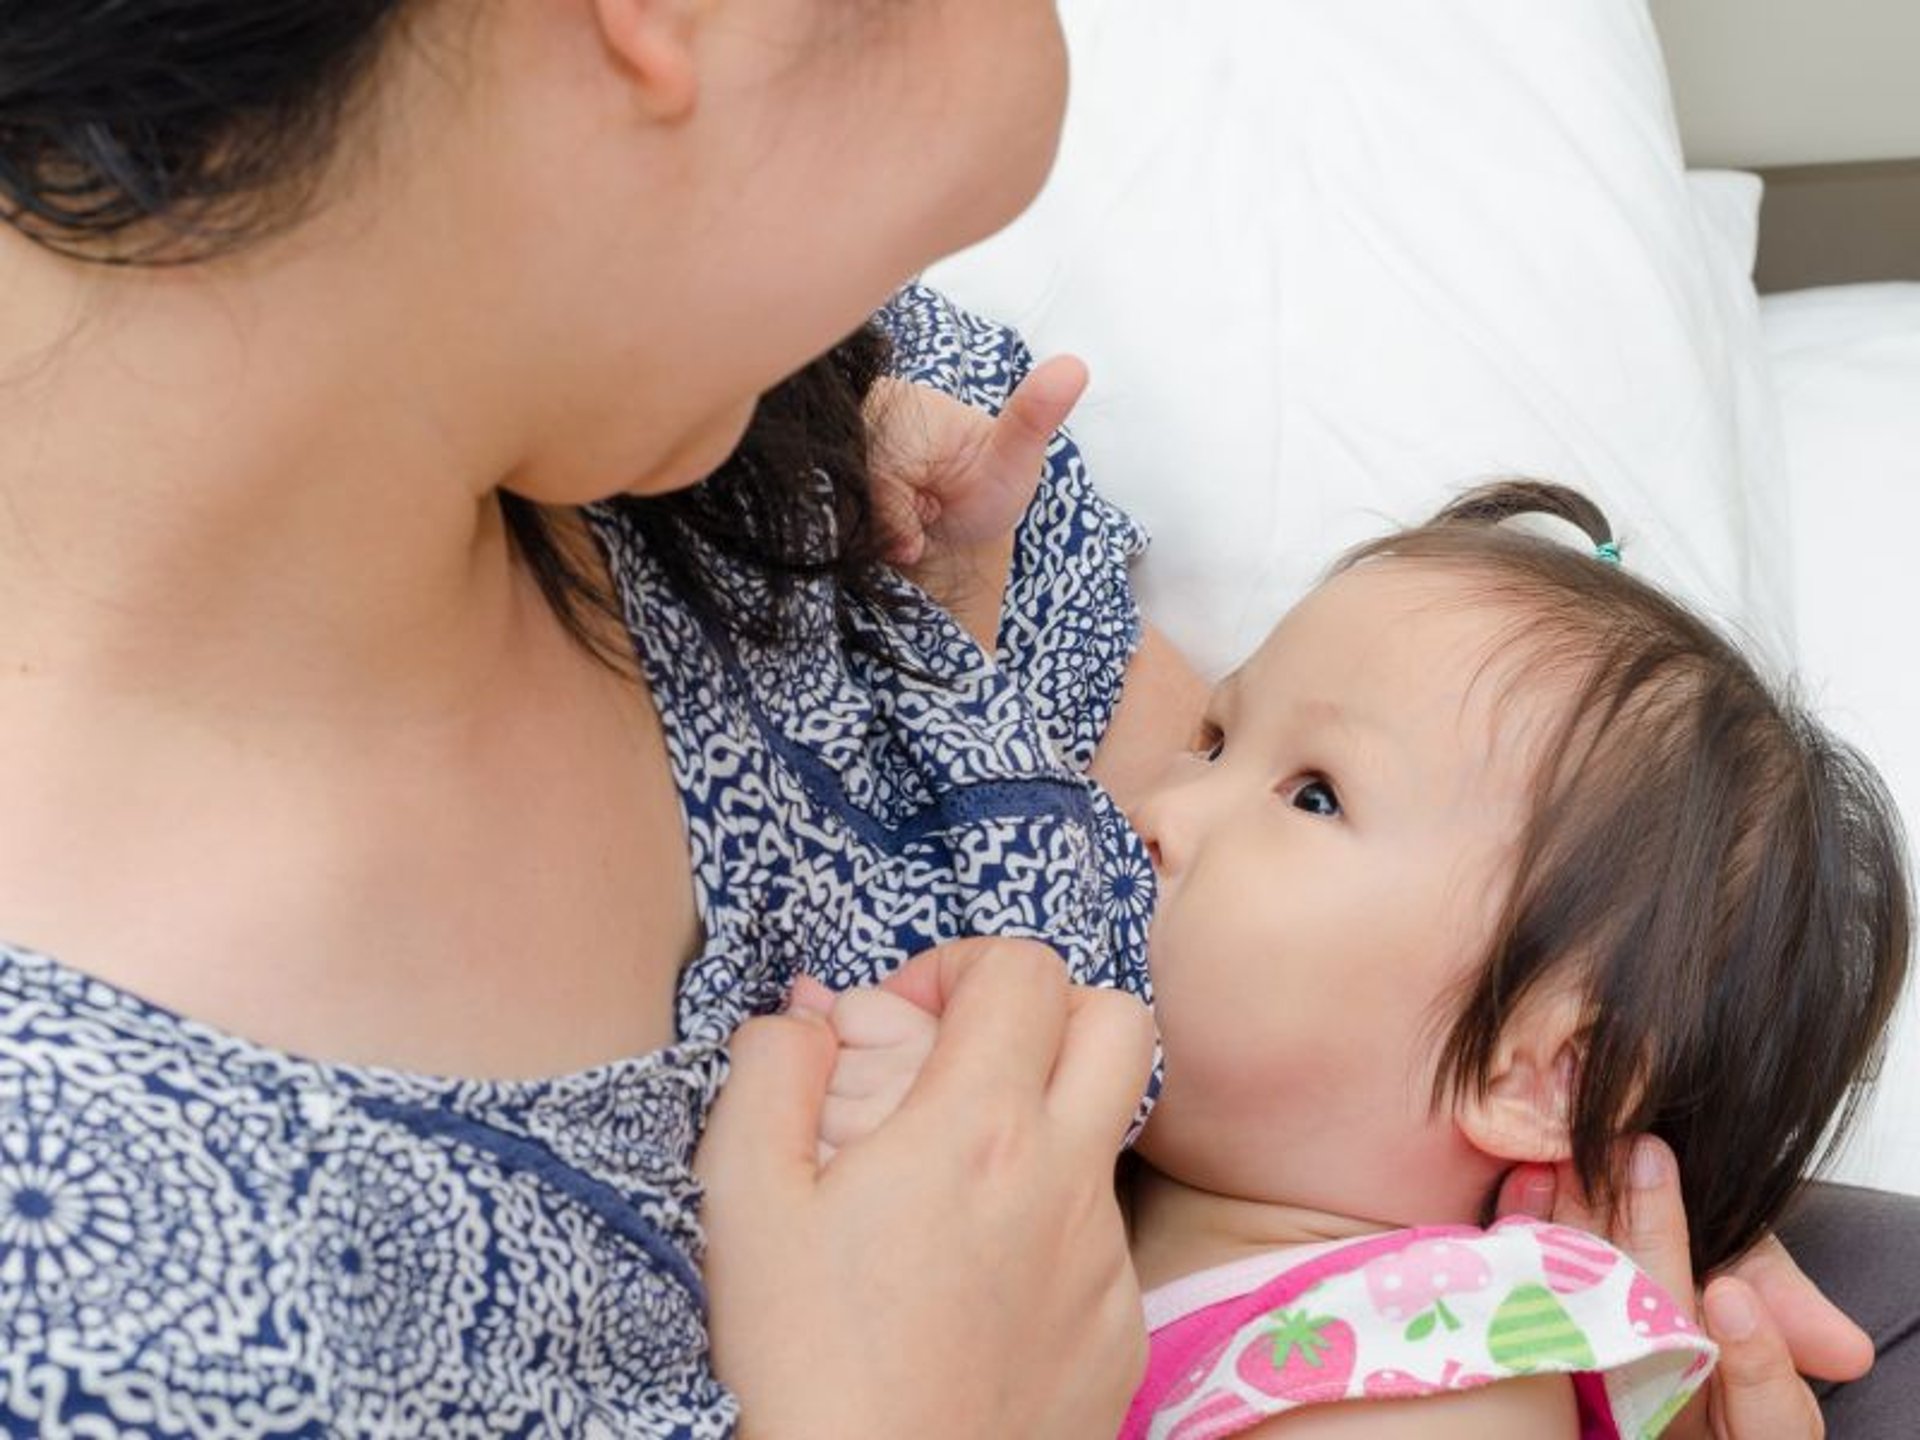 Breastfeeding Moms Get Mixed Messages